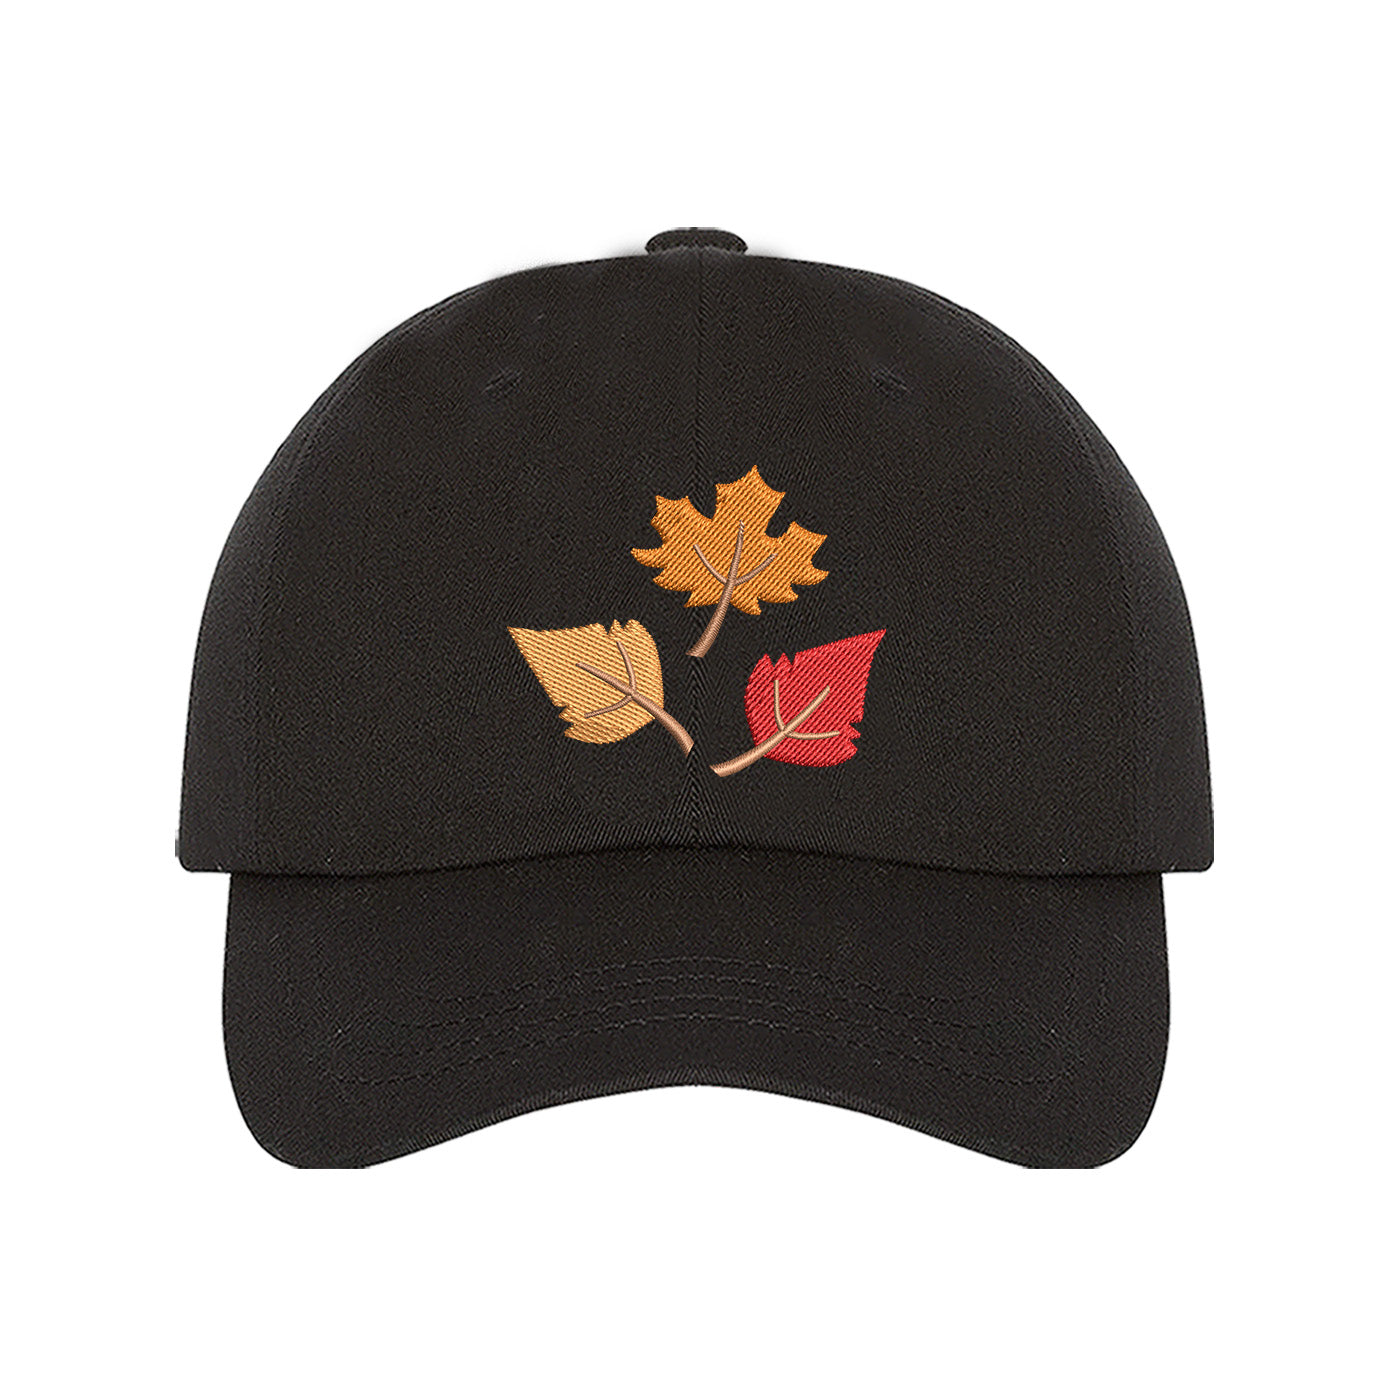  Black baseball cap embroidered with Leaves - DSY Lifestyle